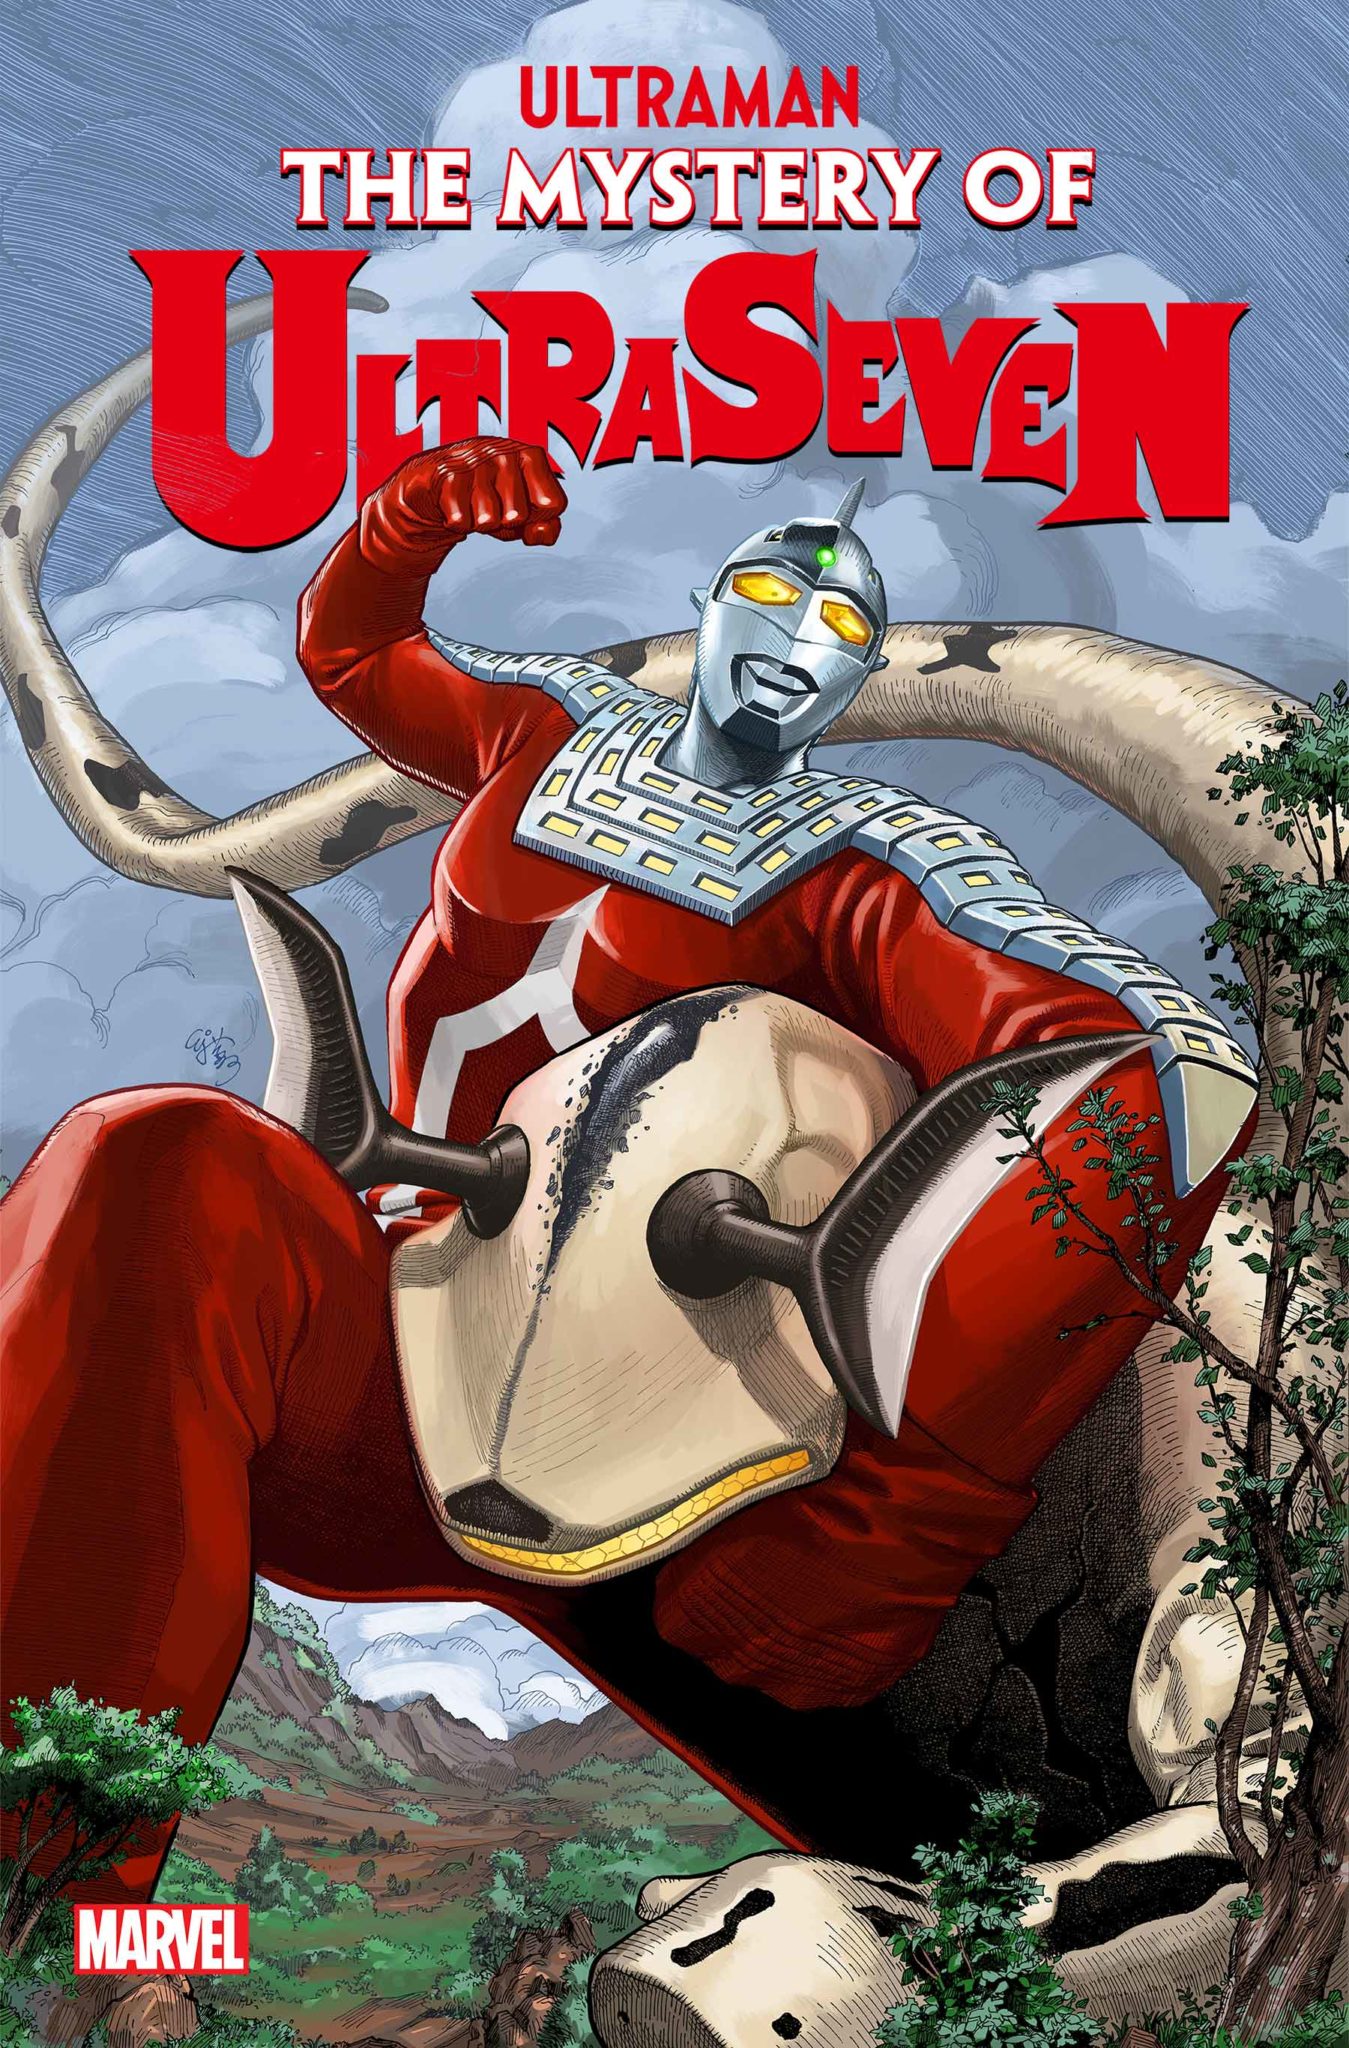 Ultraman The Mystery of the Ultraseven #1 cover